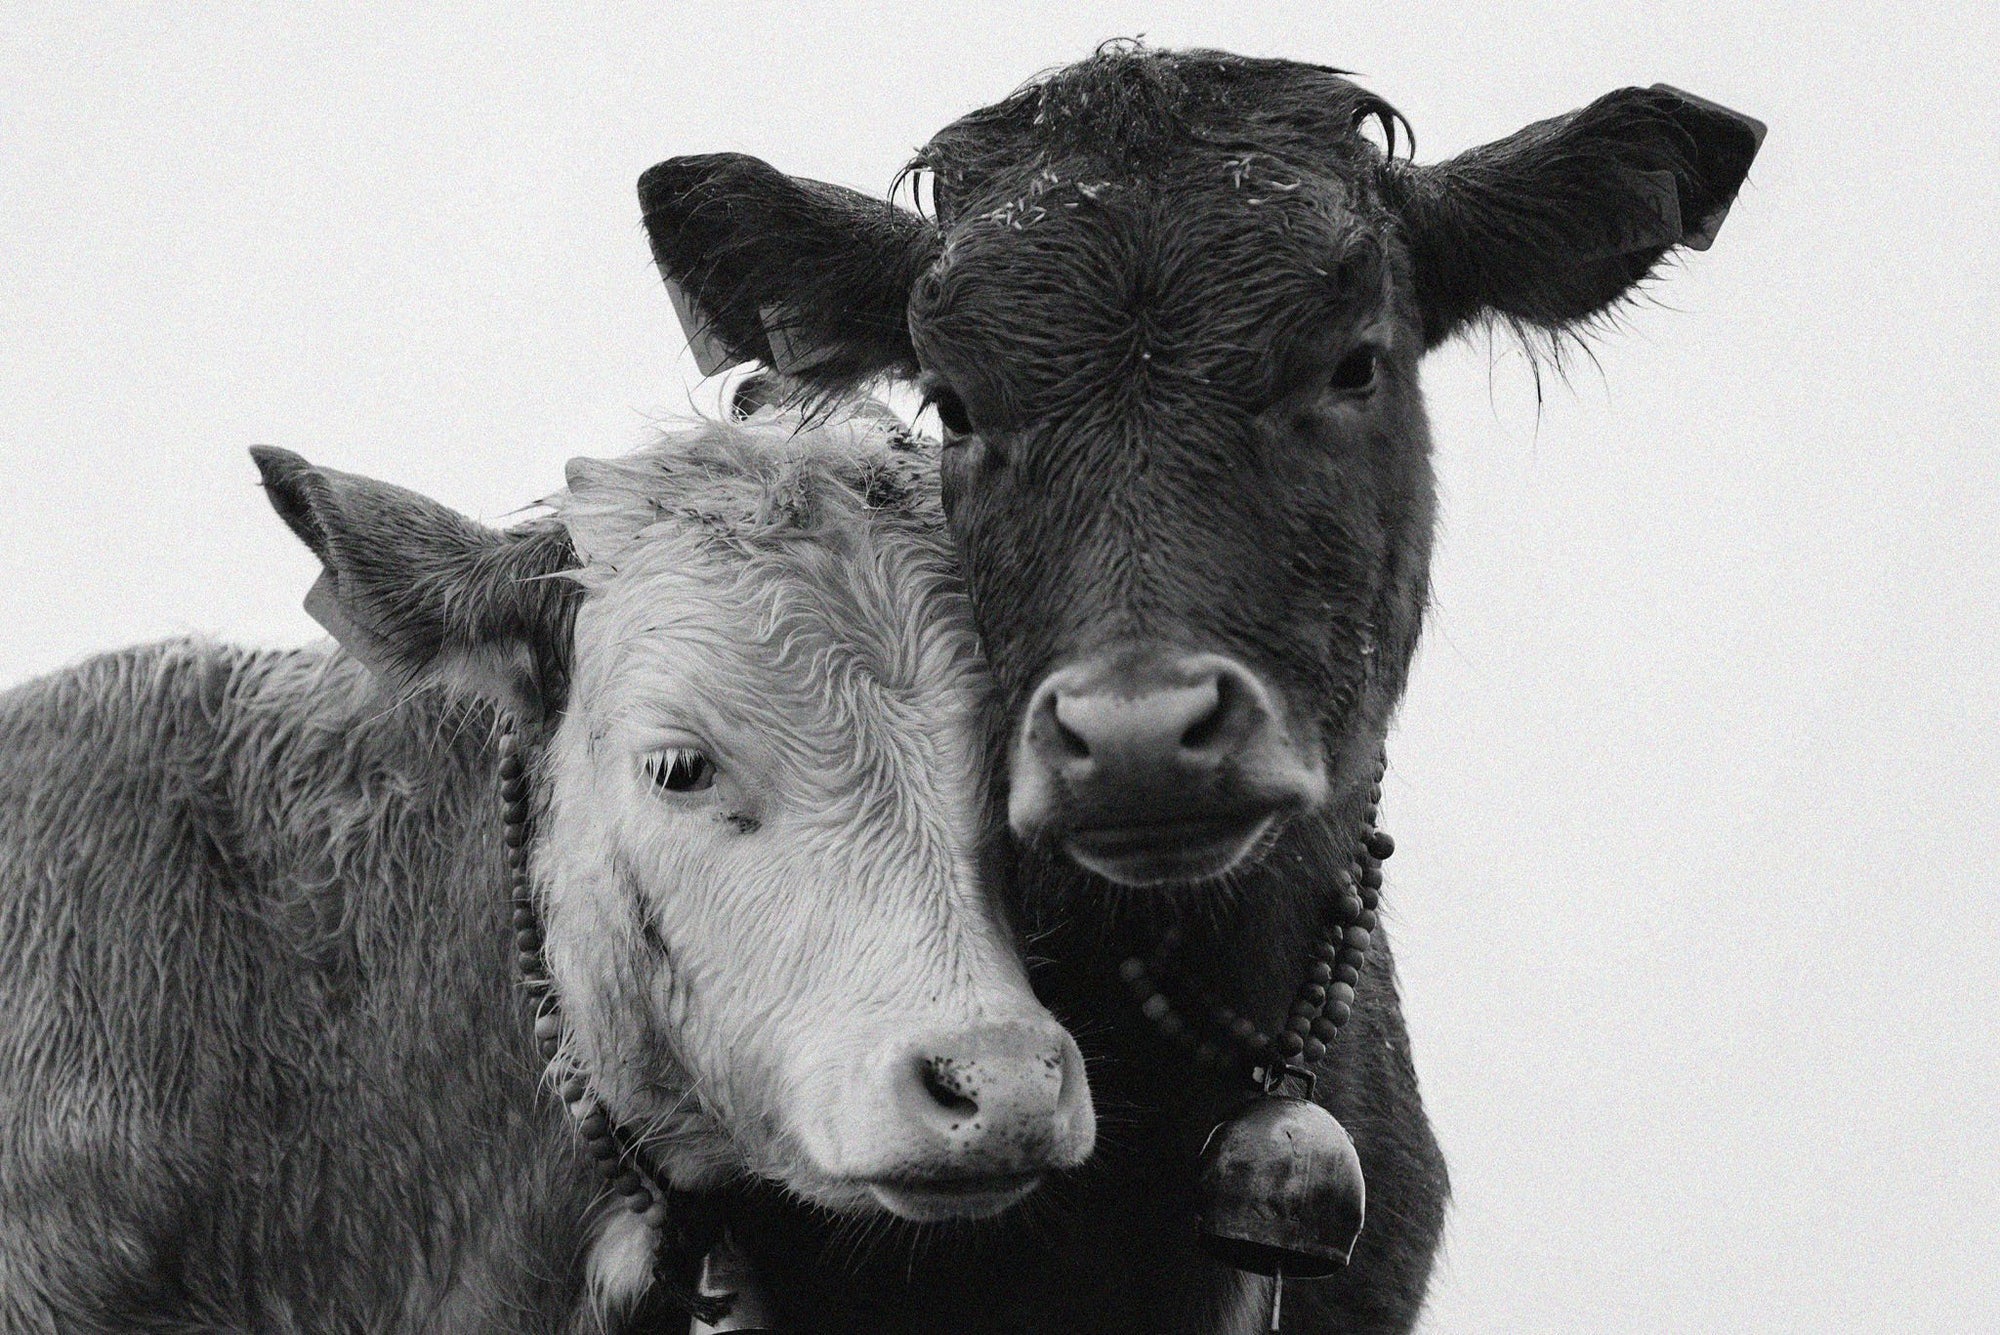 A black + white image of two cows, snuggling each other